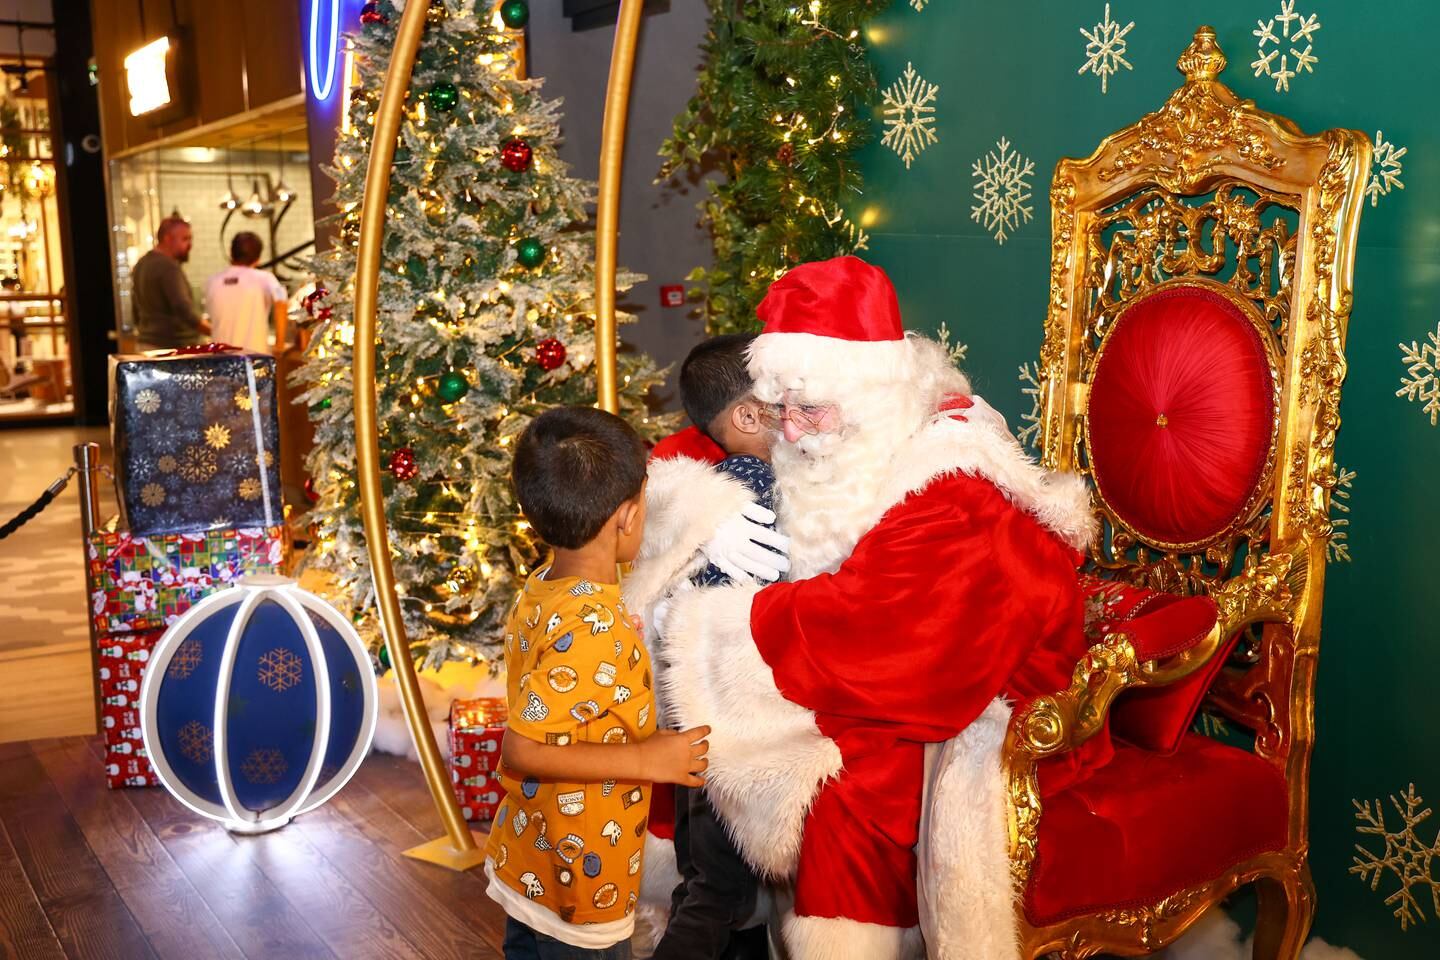 Father Christmas at the City Centre Deira grotto says 'patience, passion and kindness' are needed to best portray Santa. Photo: Photo: City Centre Deira